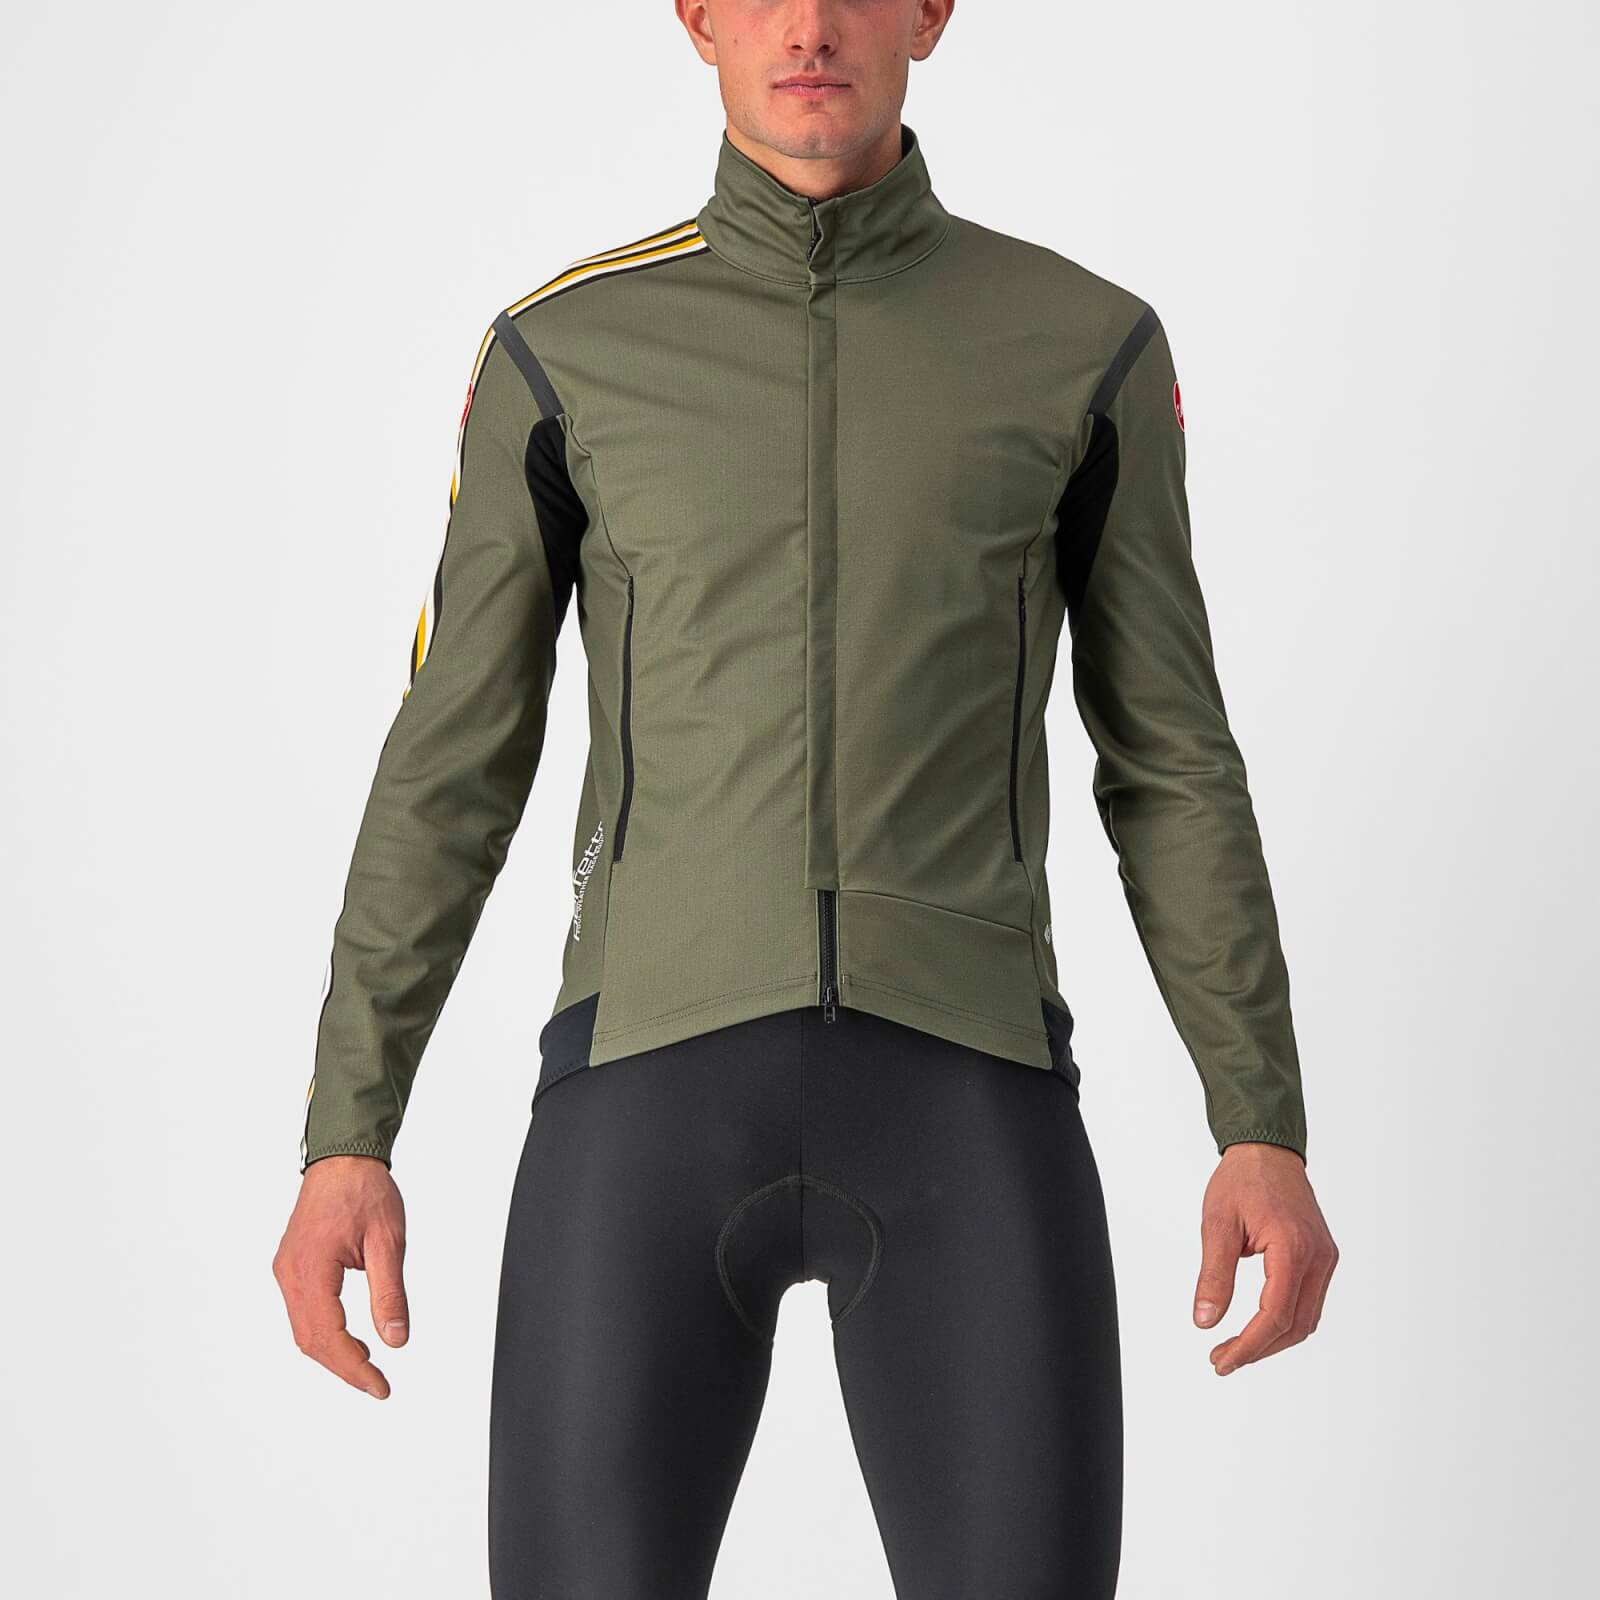 Castelli Unlimited Perfetto Ros 2 Jacket - M - Military Green/Goldenrod